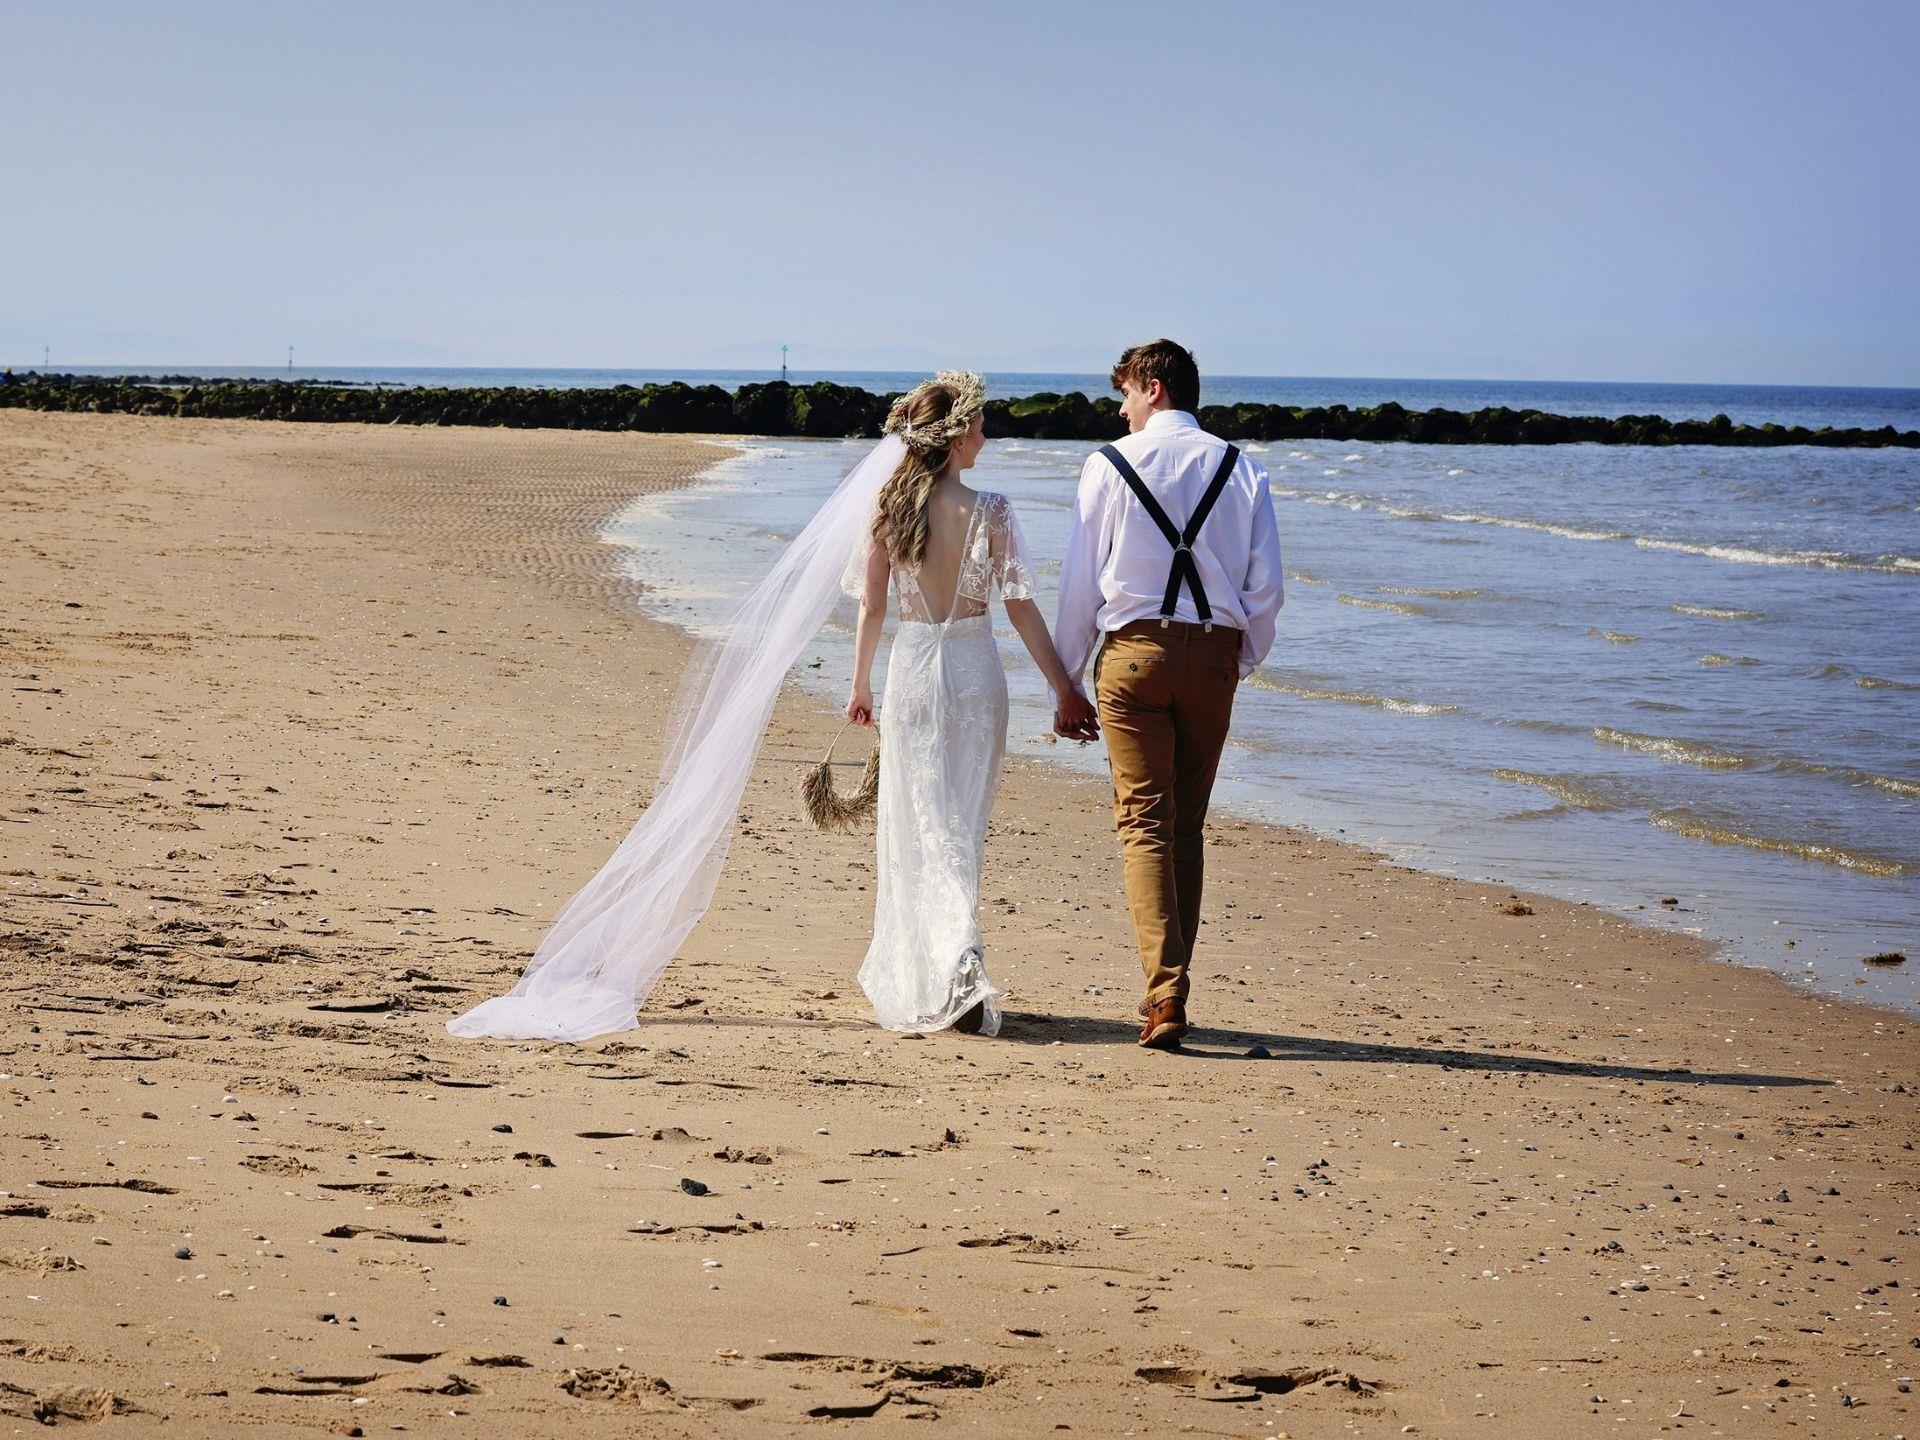 Weddings at The Beaches Hotel